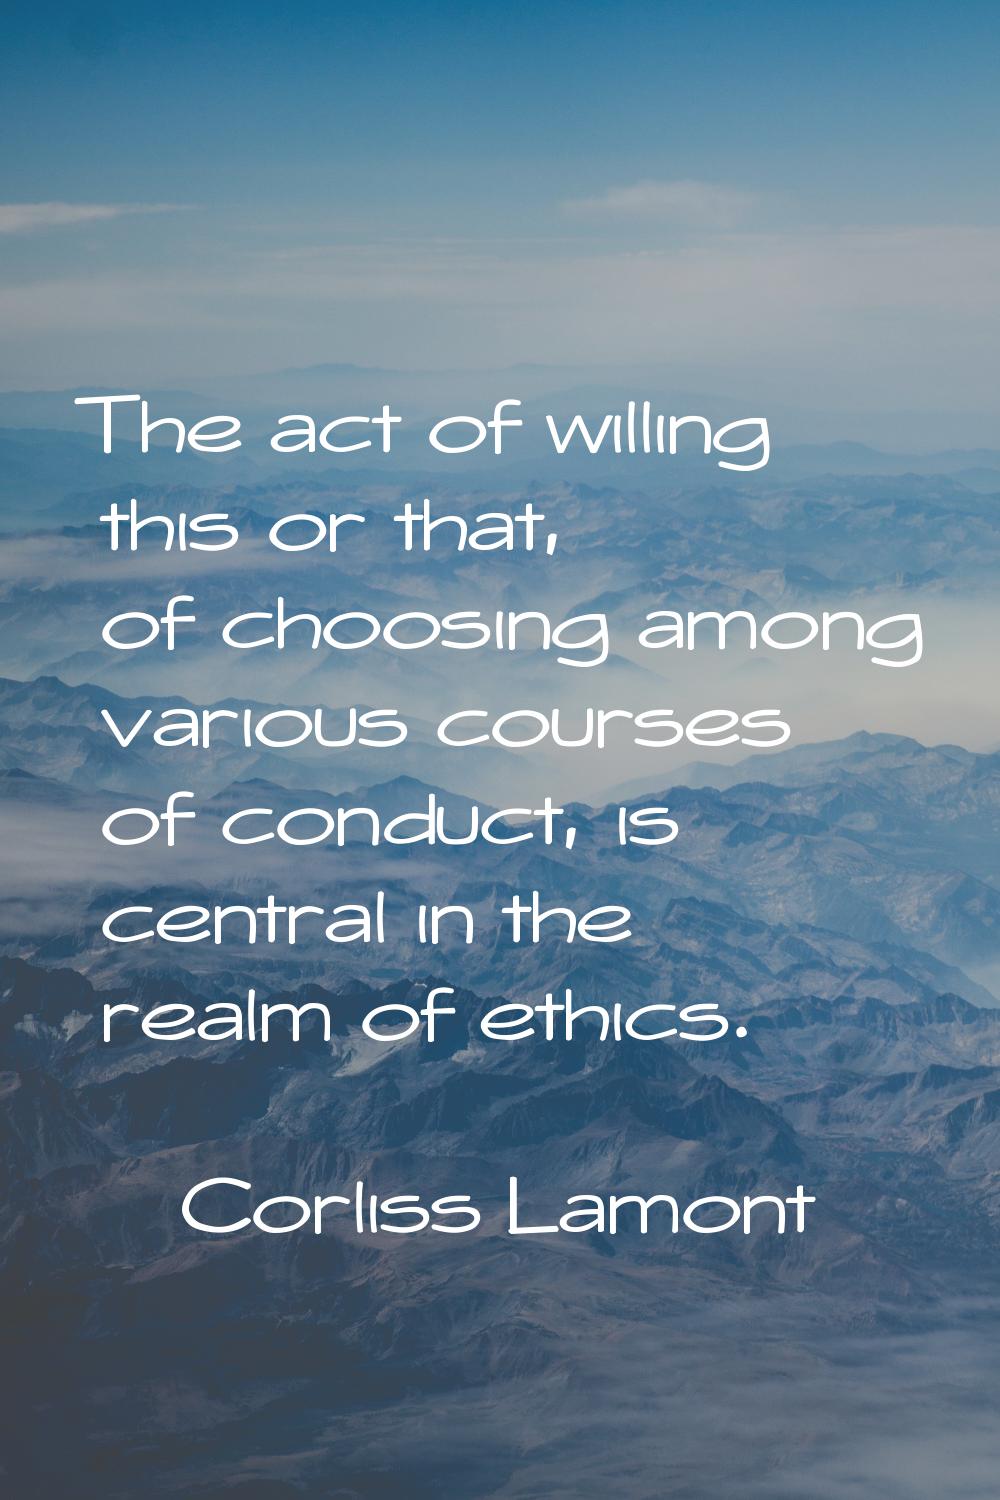 The act of willing this or that, of choosing among various courses of conduct, is central in the re